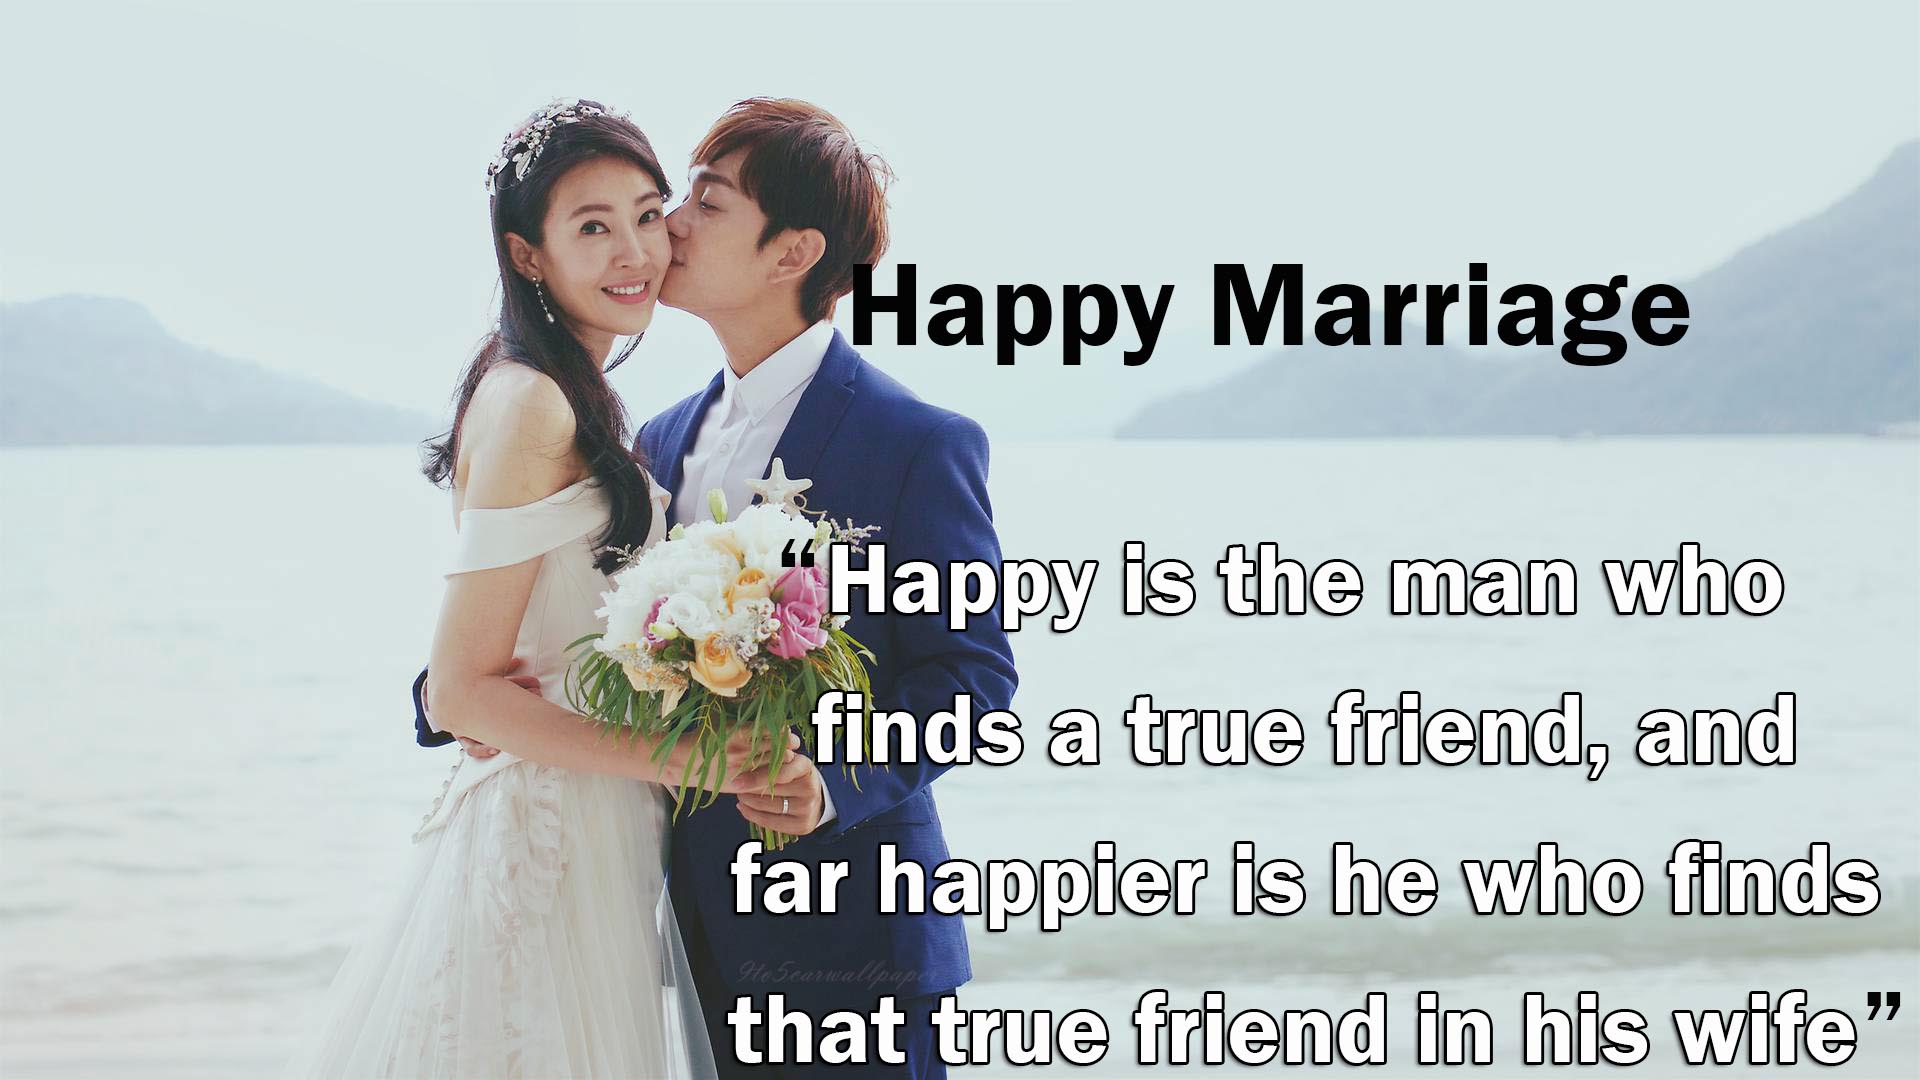 happy-marriage-wedding-wishes-quotes-2017